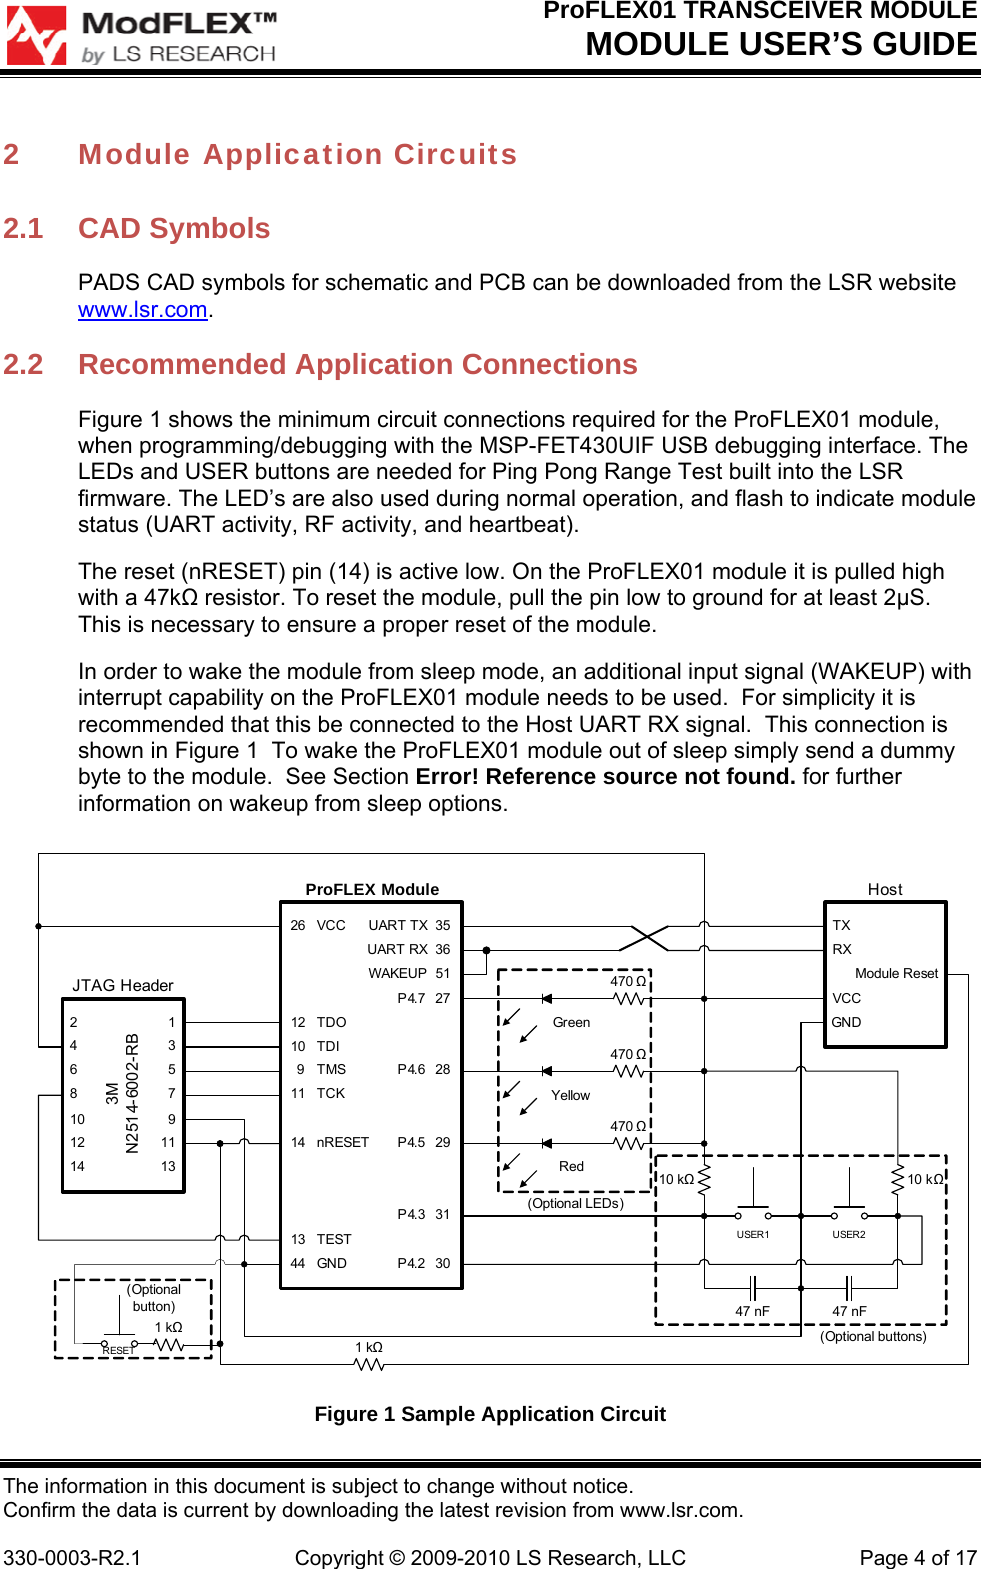 ProFLEX01 TRANSCEIVER MODULE MODULE USER’S GUIDE The information in this document is subject to change without notice. Confirm the data is current by downloading the latest revision from www.lsr.com.  330-0003-R2.1  Copyright © 2009-2010 LS Research, LLC  Page 4 of 17 2 Module Application Circuits 2.1 CAD Symbols PADS CAD symbols for schematic and PCB can be downloaded from the LSR website www.lsr.com. 2.2  Recommended Application Connections Figure 1 shows the minimum circuit connections required for the ProFLEX01 module, when programming/debugging with the MSP-FET430UIF USB debugging interface. The LEDs and USER buttons are needed for Ping Pong Range Test built into the LSR firmware. The LED’s are also used during normal operation, and flash to indicate module status (UART activity, RF activity, and heartbeat).  The reset (nRESET) pin (14) is active low. On the ProFLEX01 module it is pulled high with a 47k resistor. To reset the module, pull the pin low to ground for at least 2S. This is necessary to ensure a proper reset of the module.  In order to wake the module from sleep mode, an additional input signal (WAKEUP) with interrupt capability on the ProFLEX01 module needs to be used.  For simplicity it is recommended that this be connected to the Host UART RX signal.  This connection is shown in Figure 1  To wake the ProFLEX01 module out of sleep simply send a dummy byte to the module.  See Section Error! Reference source not found. for further information on wakeup from sleep options. (Optional LEDs)(Optional buttons)26 VCC UART TX 35UART RX 36WAKEUP  51P4.7 2712 TDO10 TDI9TMS P4.62811 TCK14 nRESET P4.5 29P4.3 3113 TEST44 GND P4.2 30JTAG Header2                        14                        36                        58                        710                      912                    1114                    13ProFLEX Module3MN2514-6002-RBTXRXModule ResetVCCGNDUSER1Host470 10 k47 nF470 470 USER247 nF10 kGreenRedYellowRESET1 k(Optionalbutton)1 k  Figure 1 Sample Application Circuit 